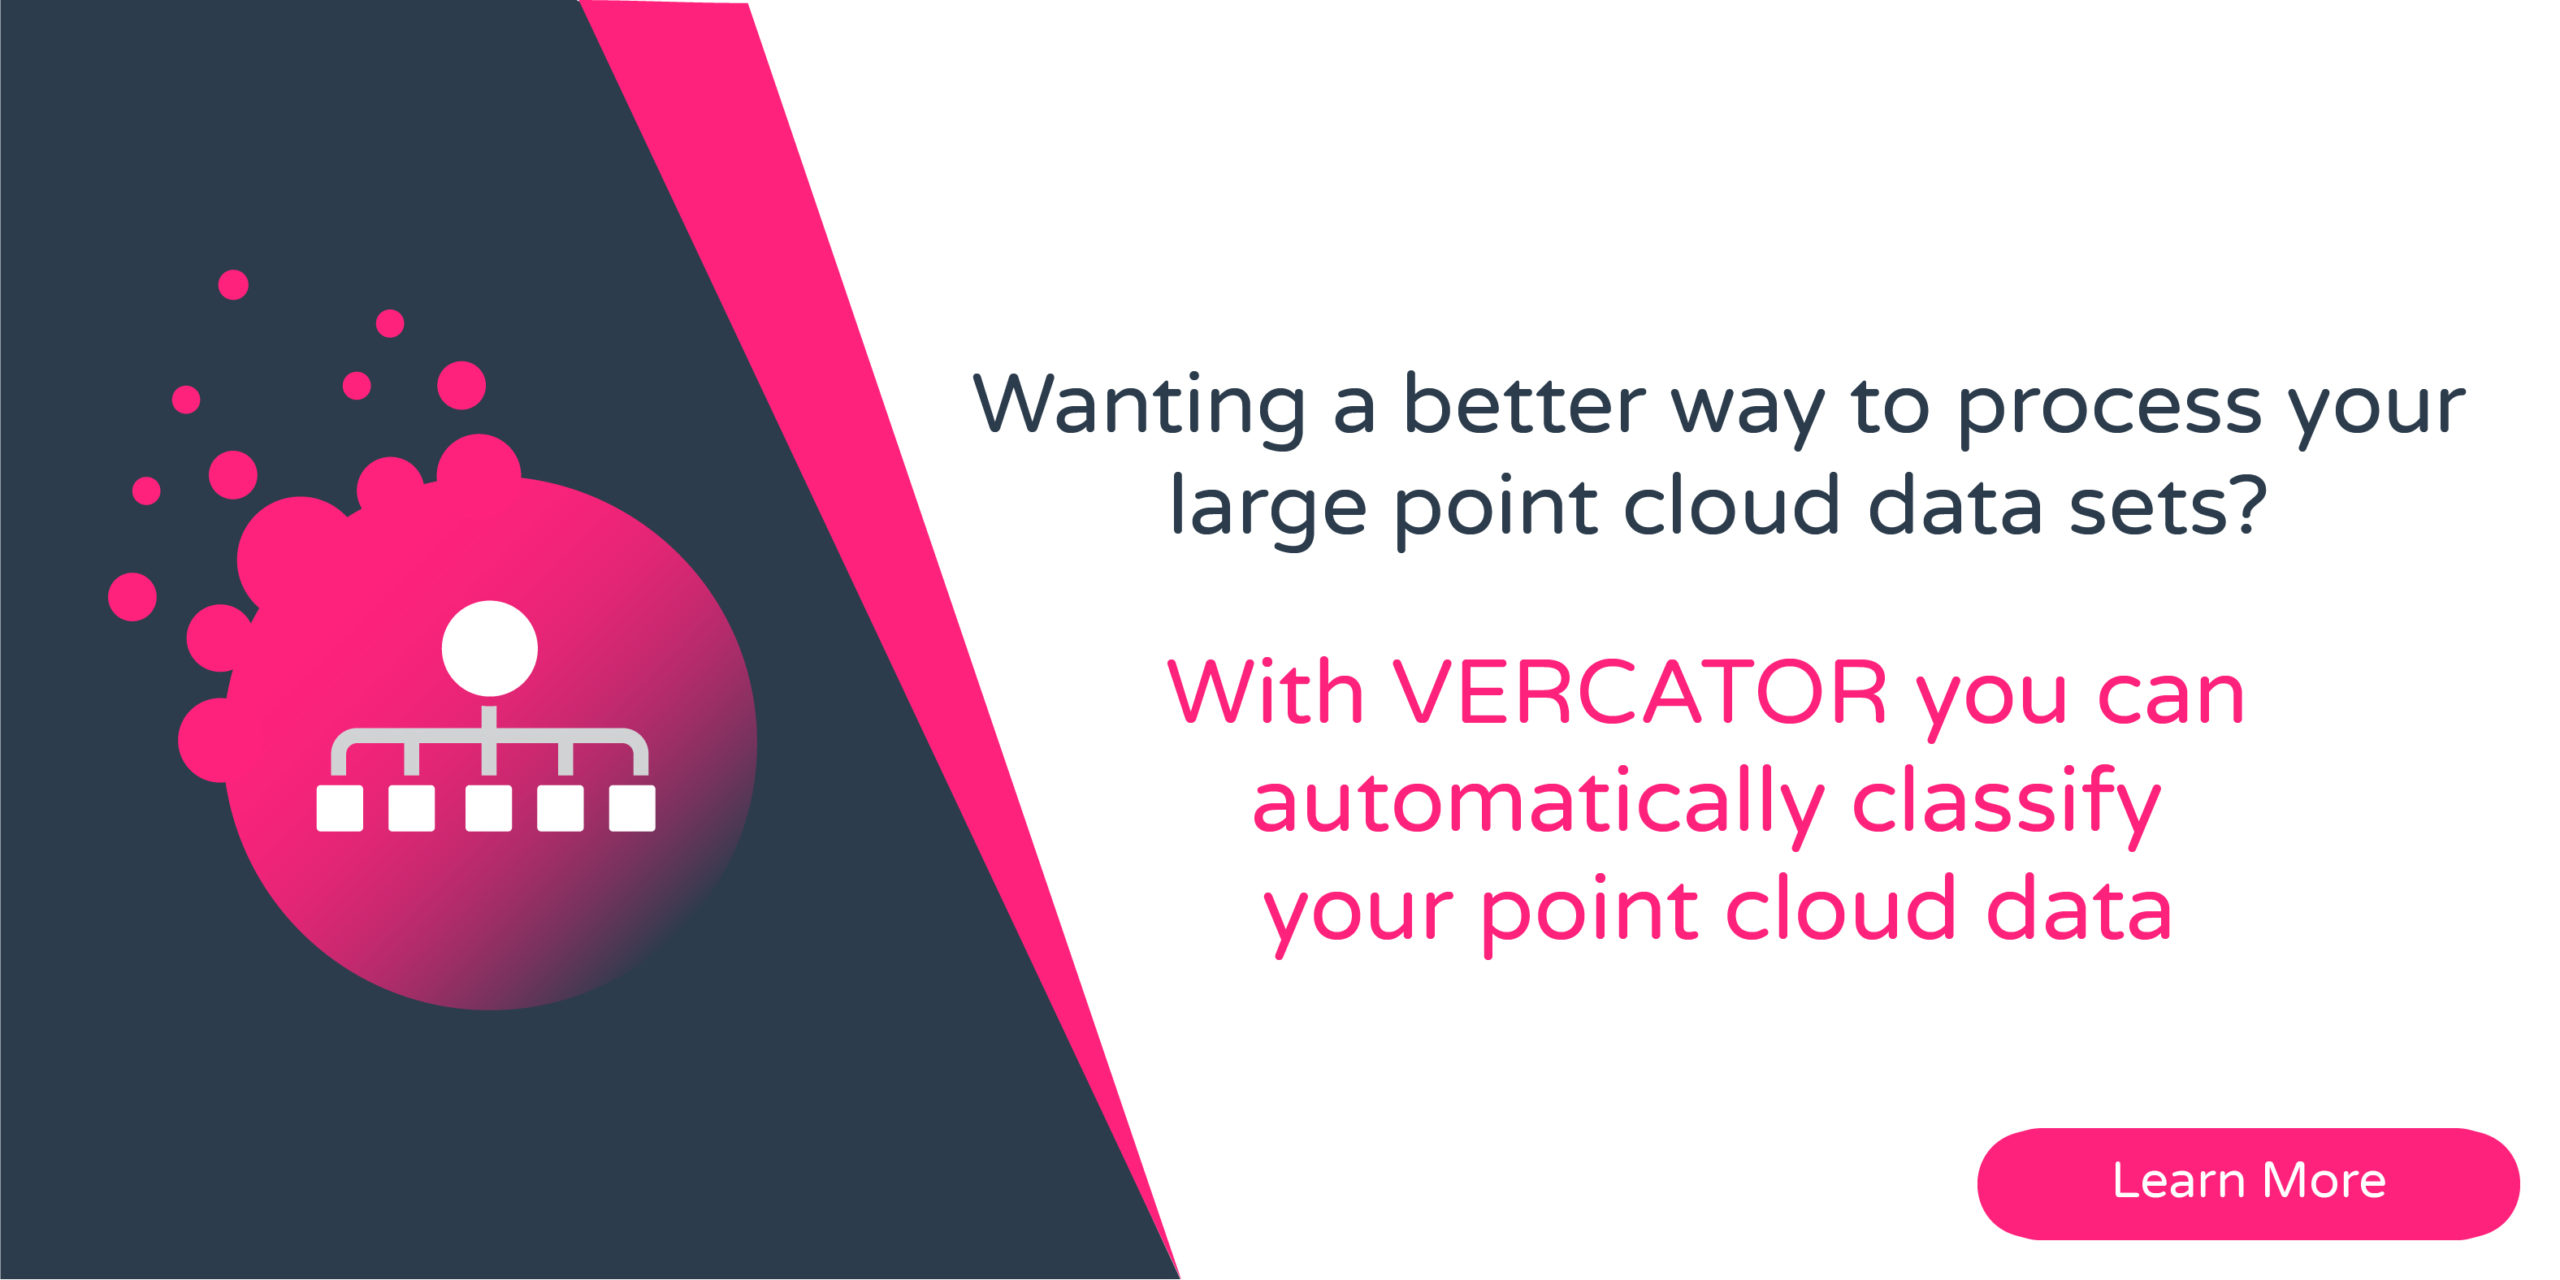 With VERCATOR you can automatically classify your point cloud data